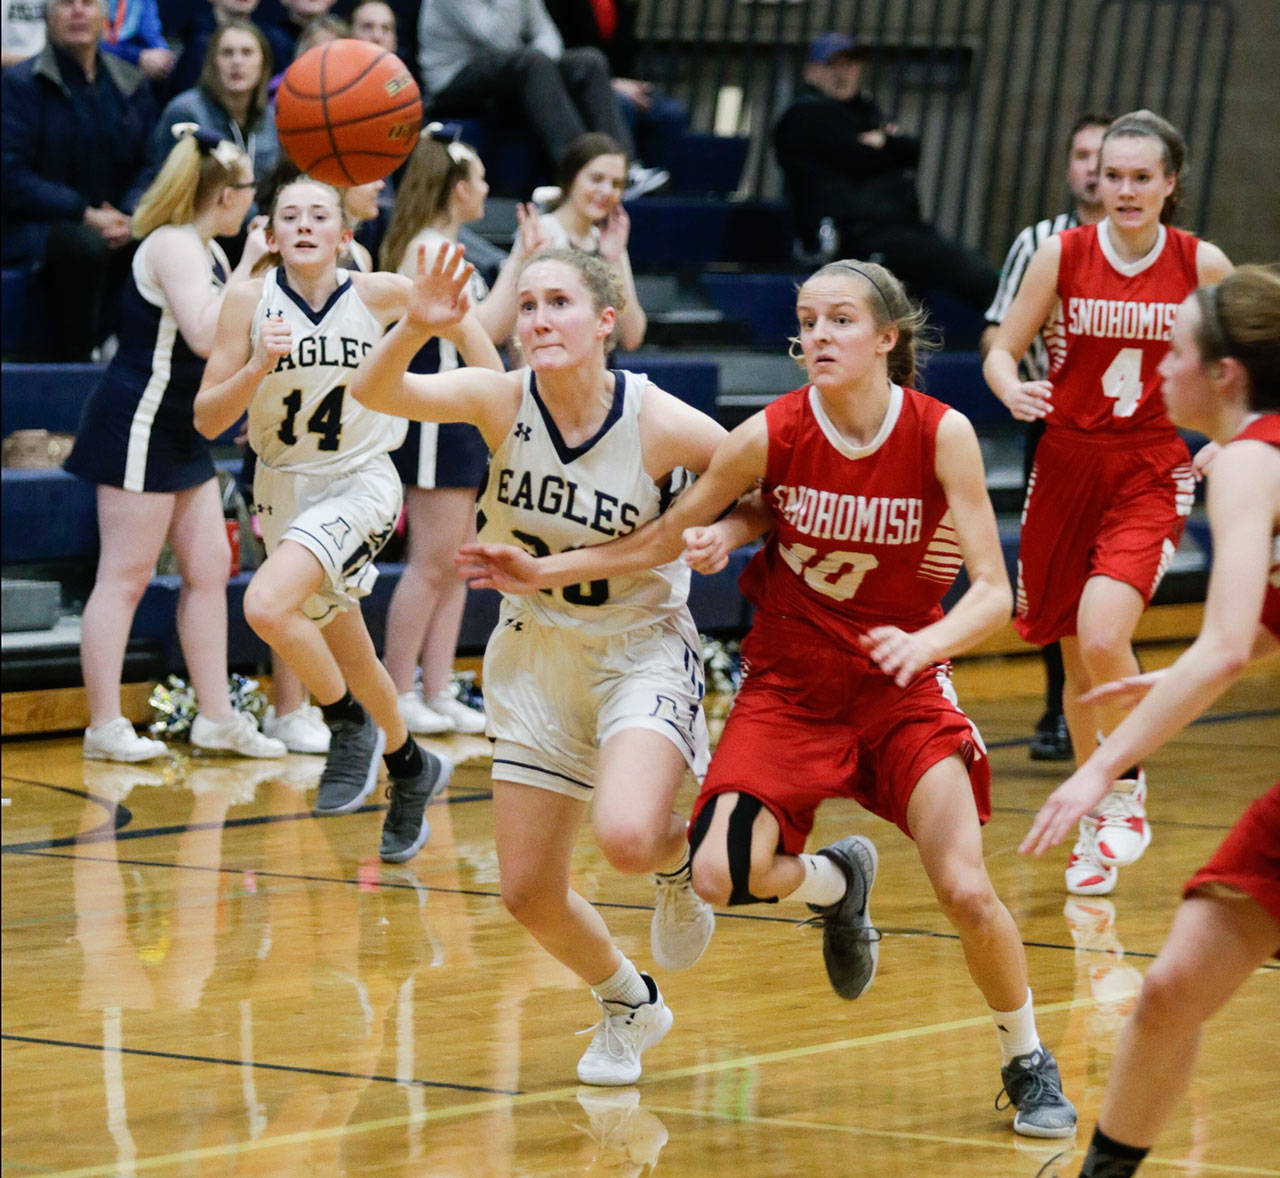 Arlington’s Sierra Scheppele (left) battles Snohomish’s Kayla Soderstrom for a loose ball during Friday’s game in Arlington. (Andy Bronson / The Herald)